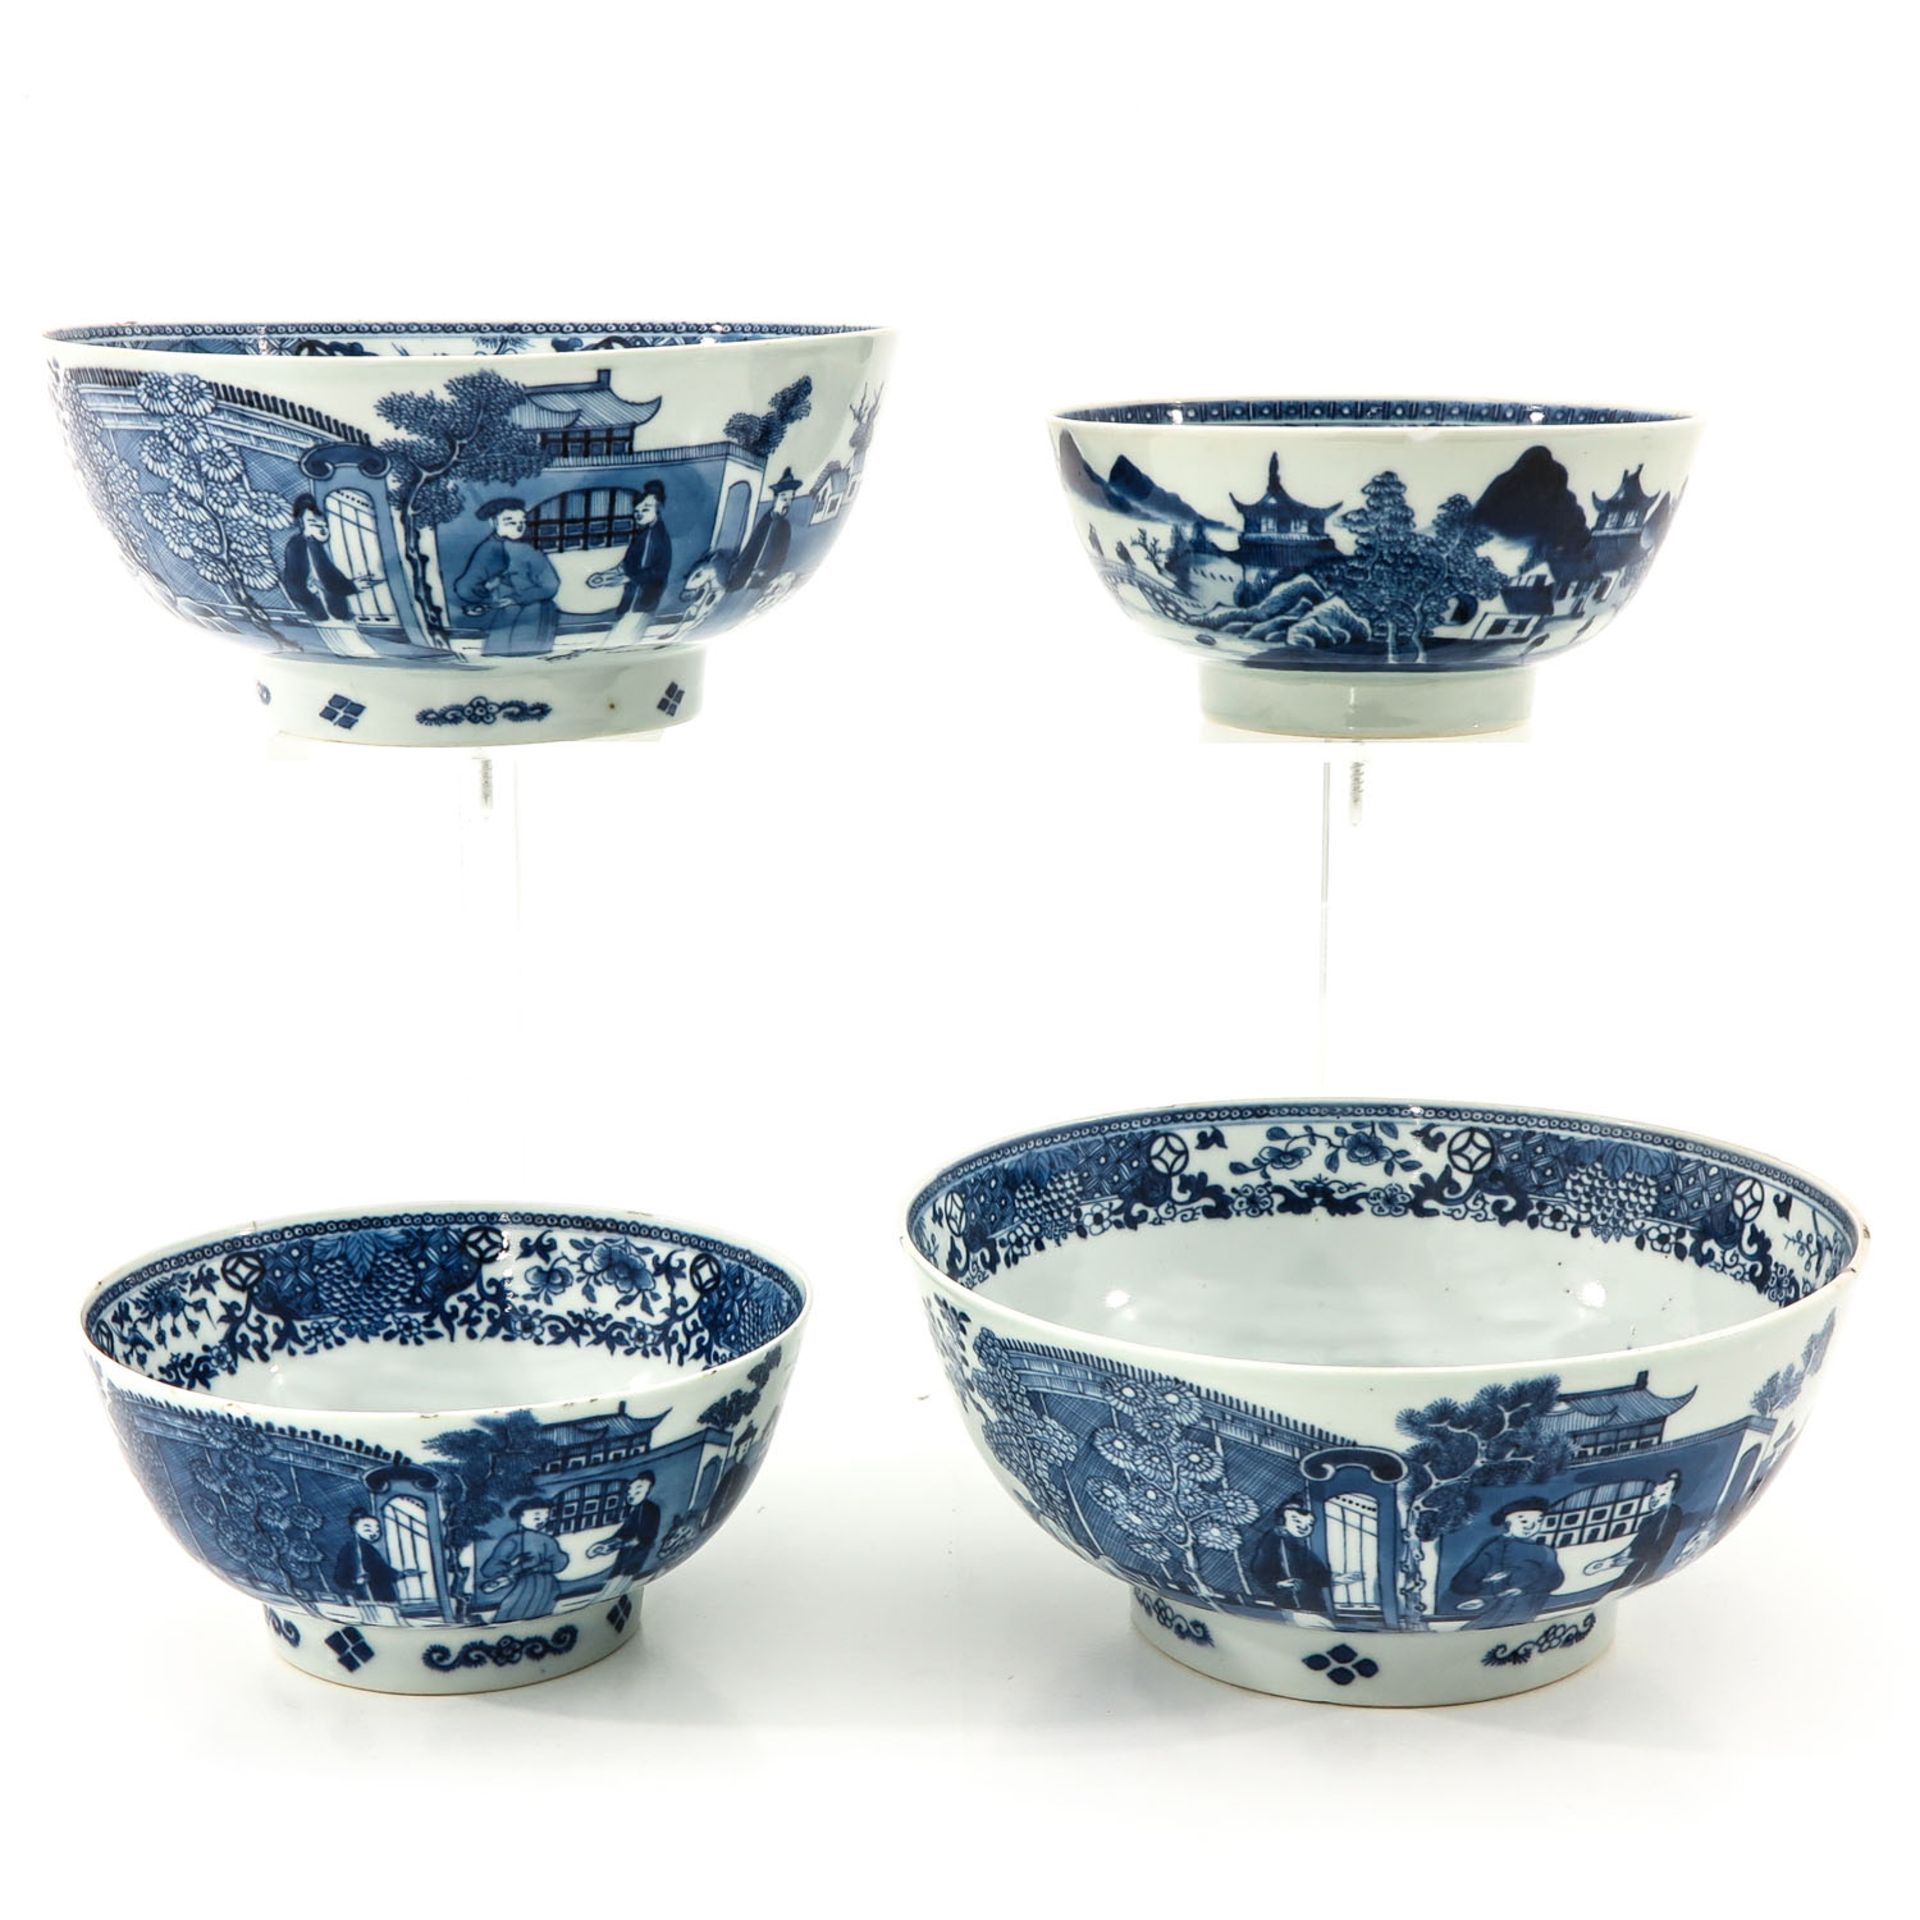 A Collection of 4 Blue and White Bowls